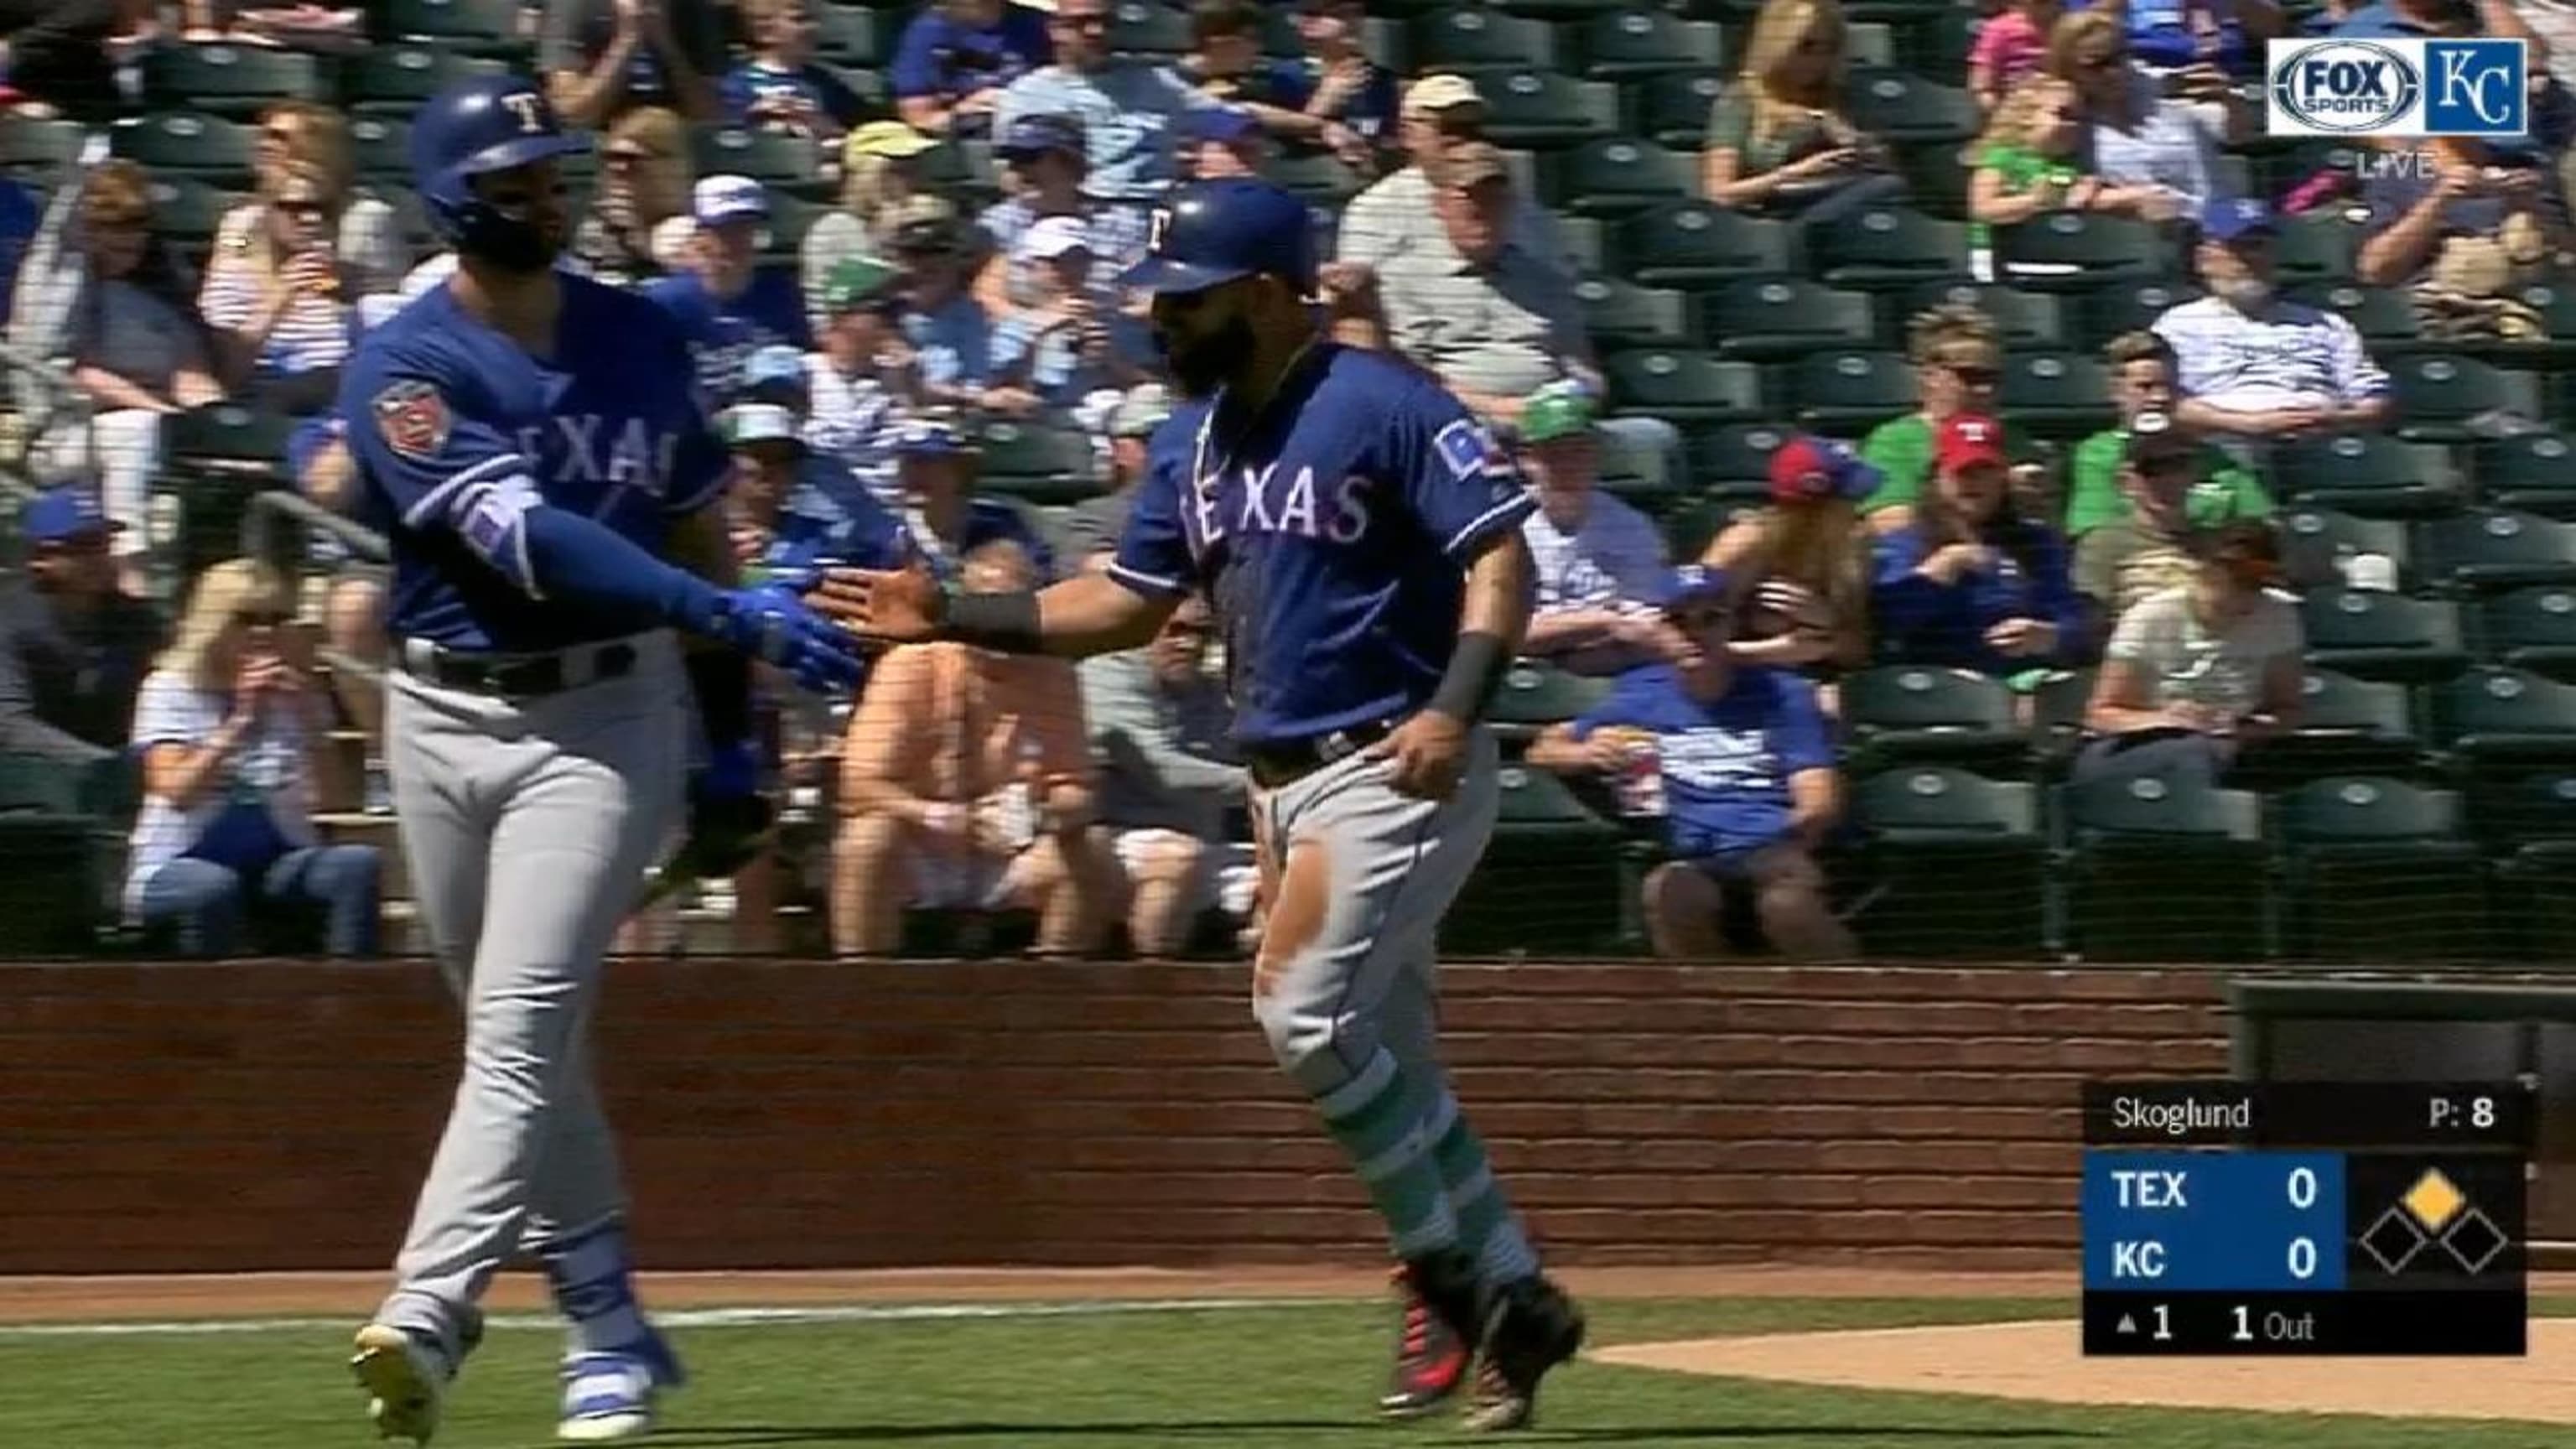 Brothers Rougned Odor and Rougned Odor finally share field for Rangers